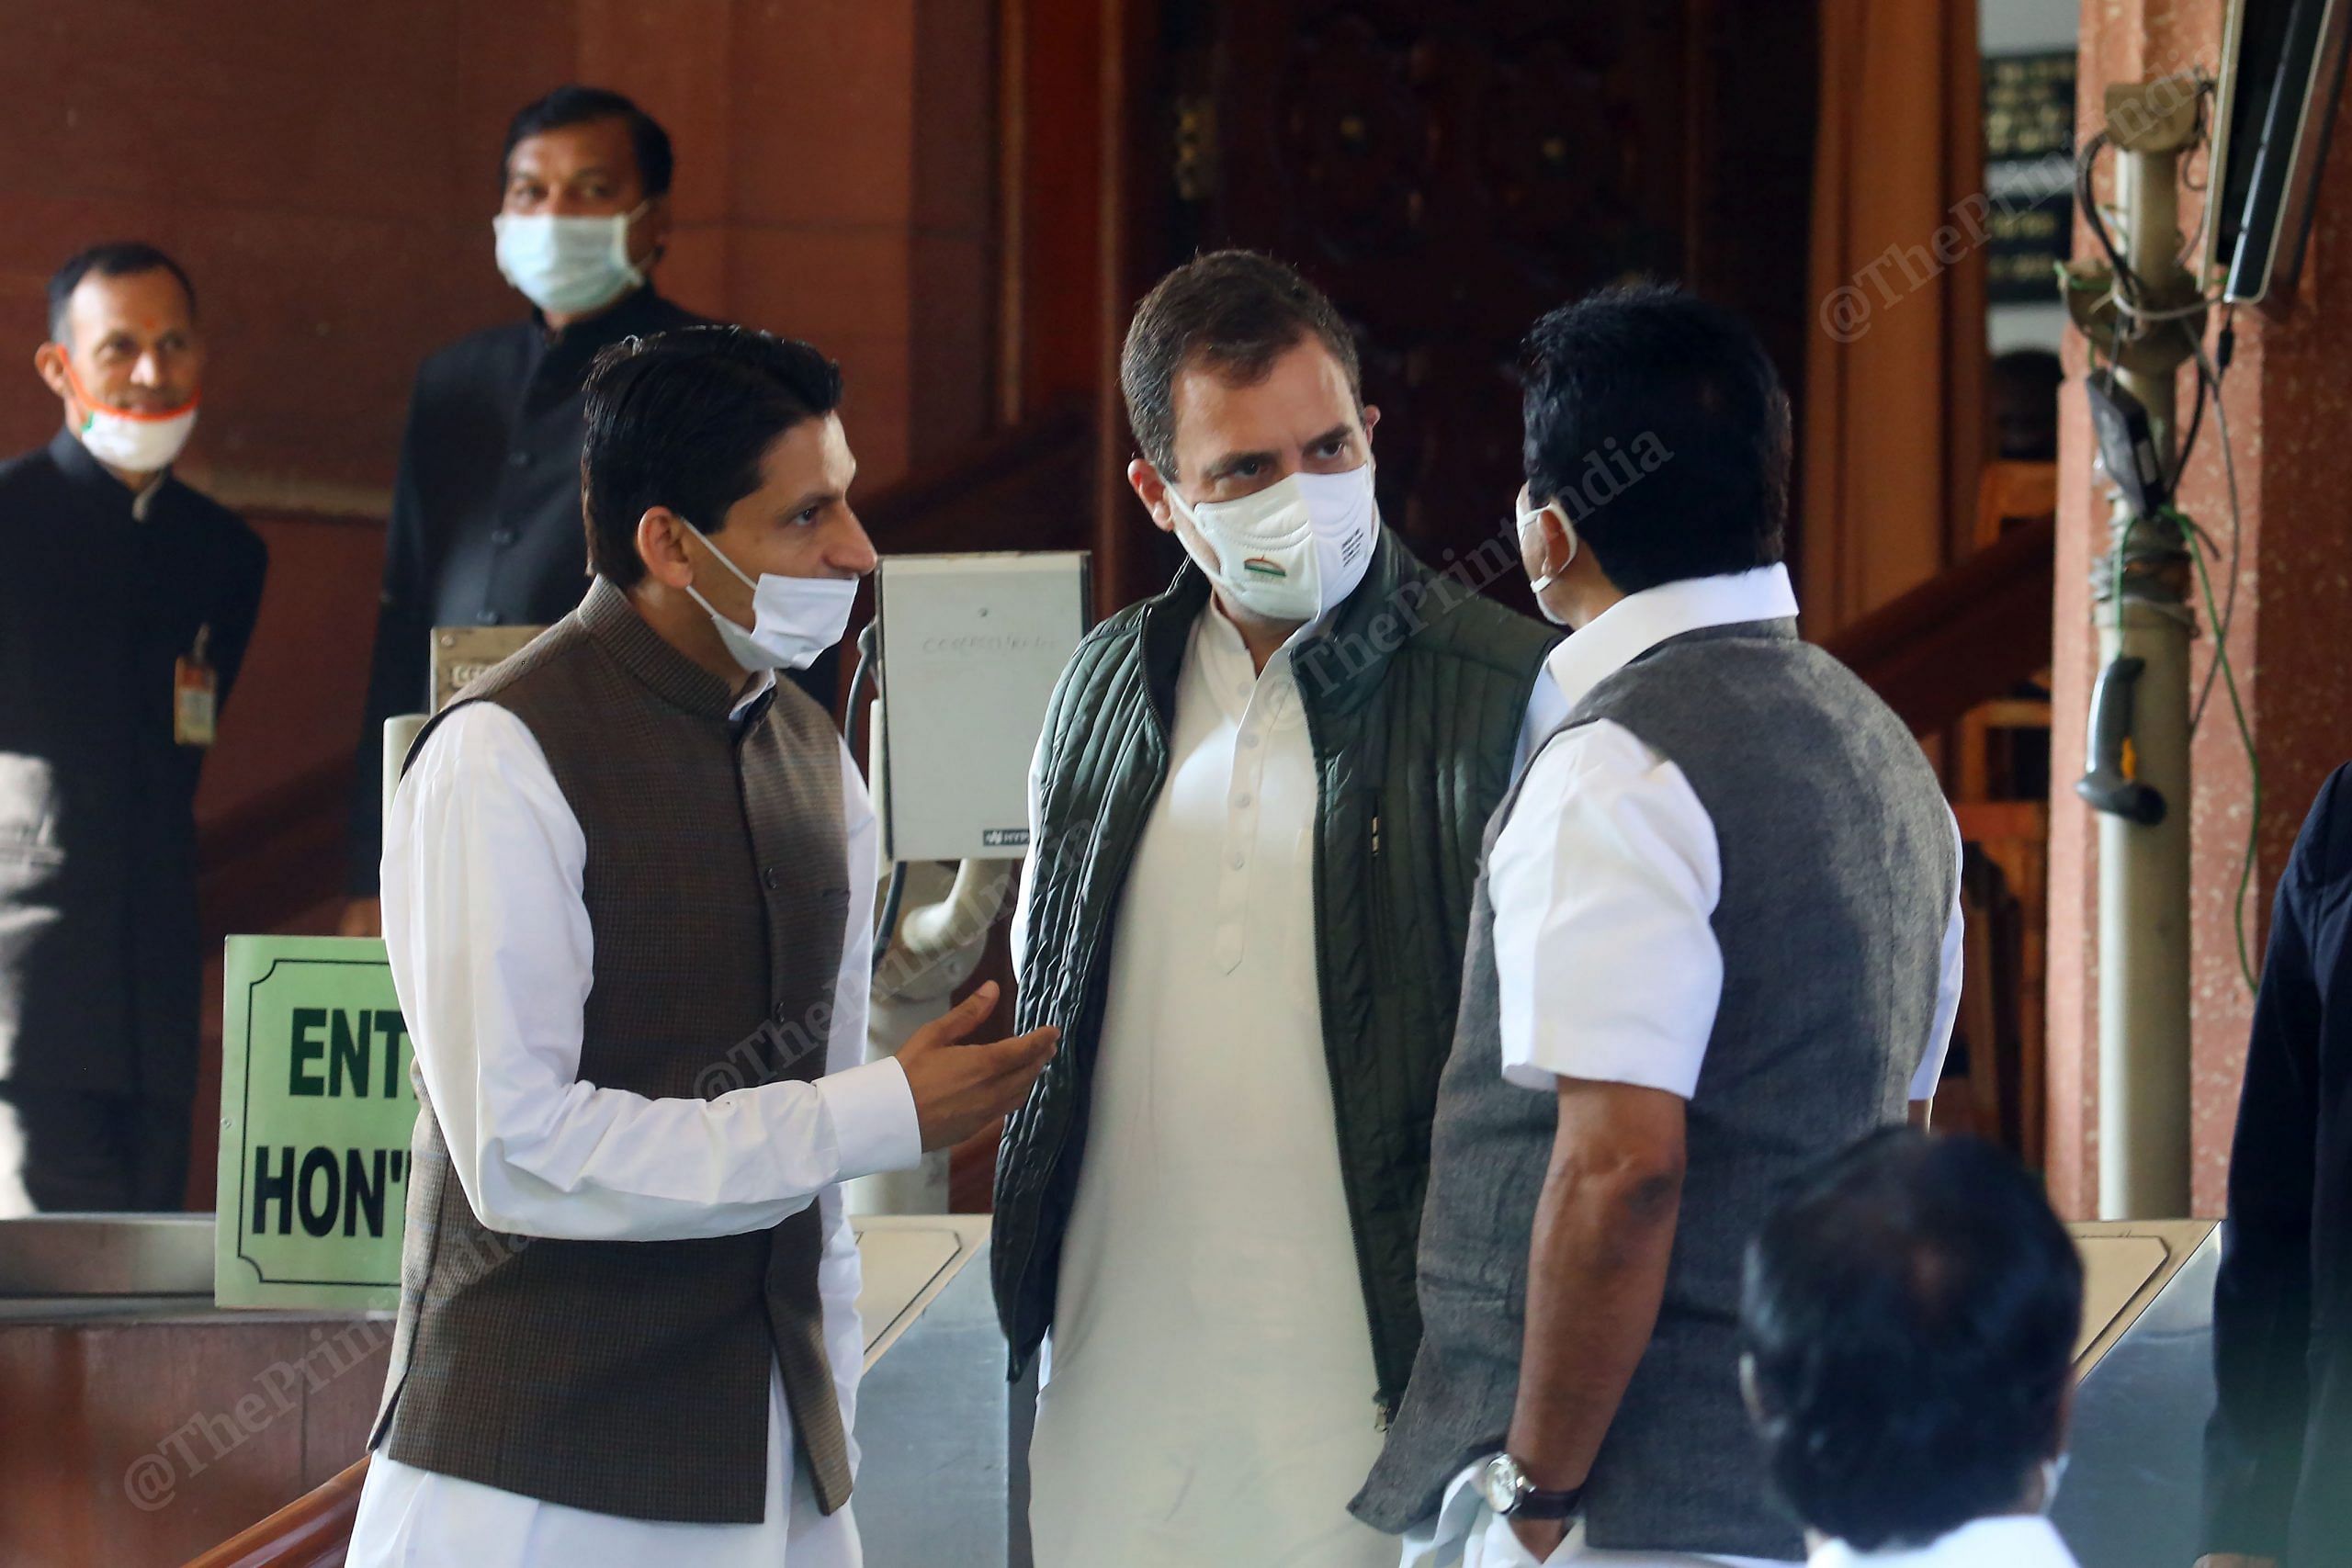 Congress leader Rahul Gandhi, with party members Deepender Singh Hooda and K. C. Venugopal outside Parliament House | Photo: Praveen Jain | ThePrint